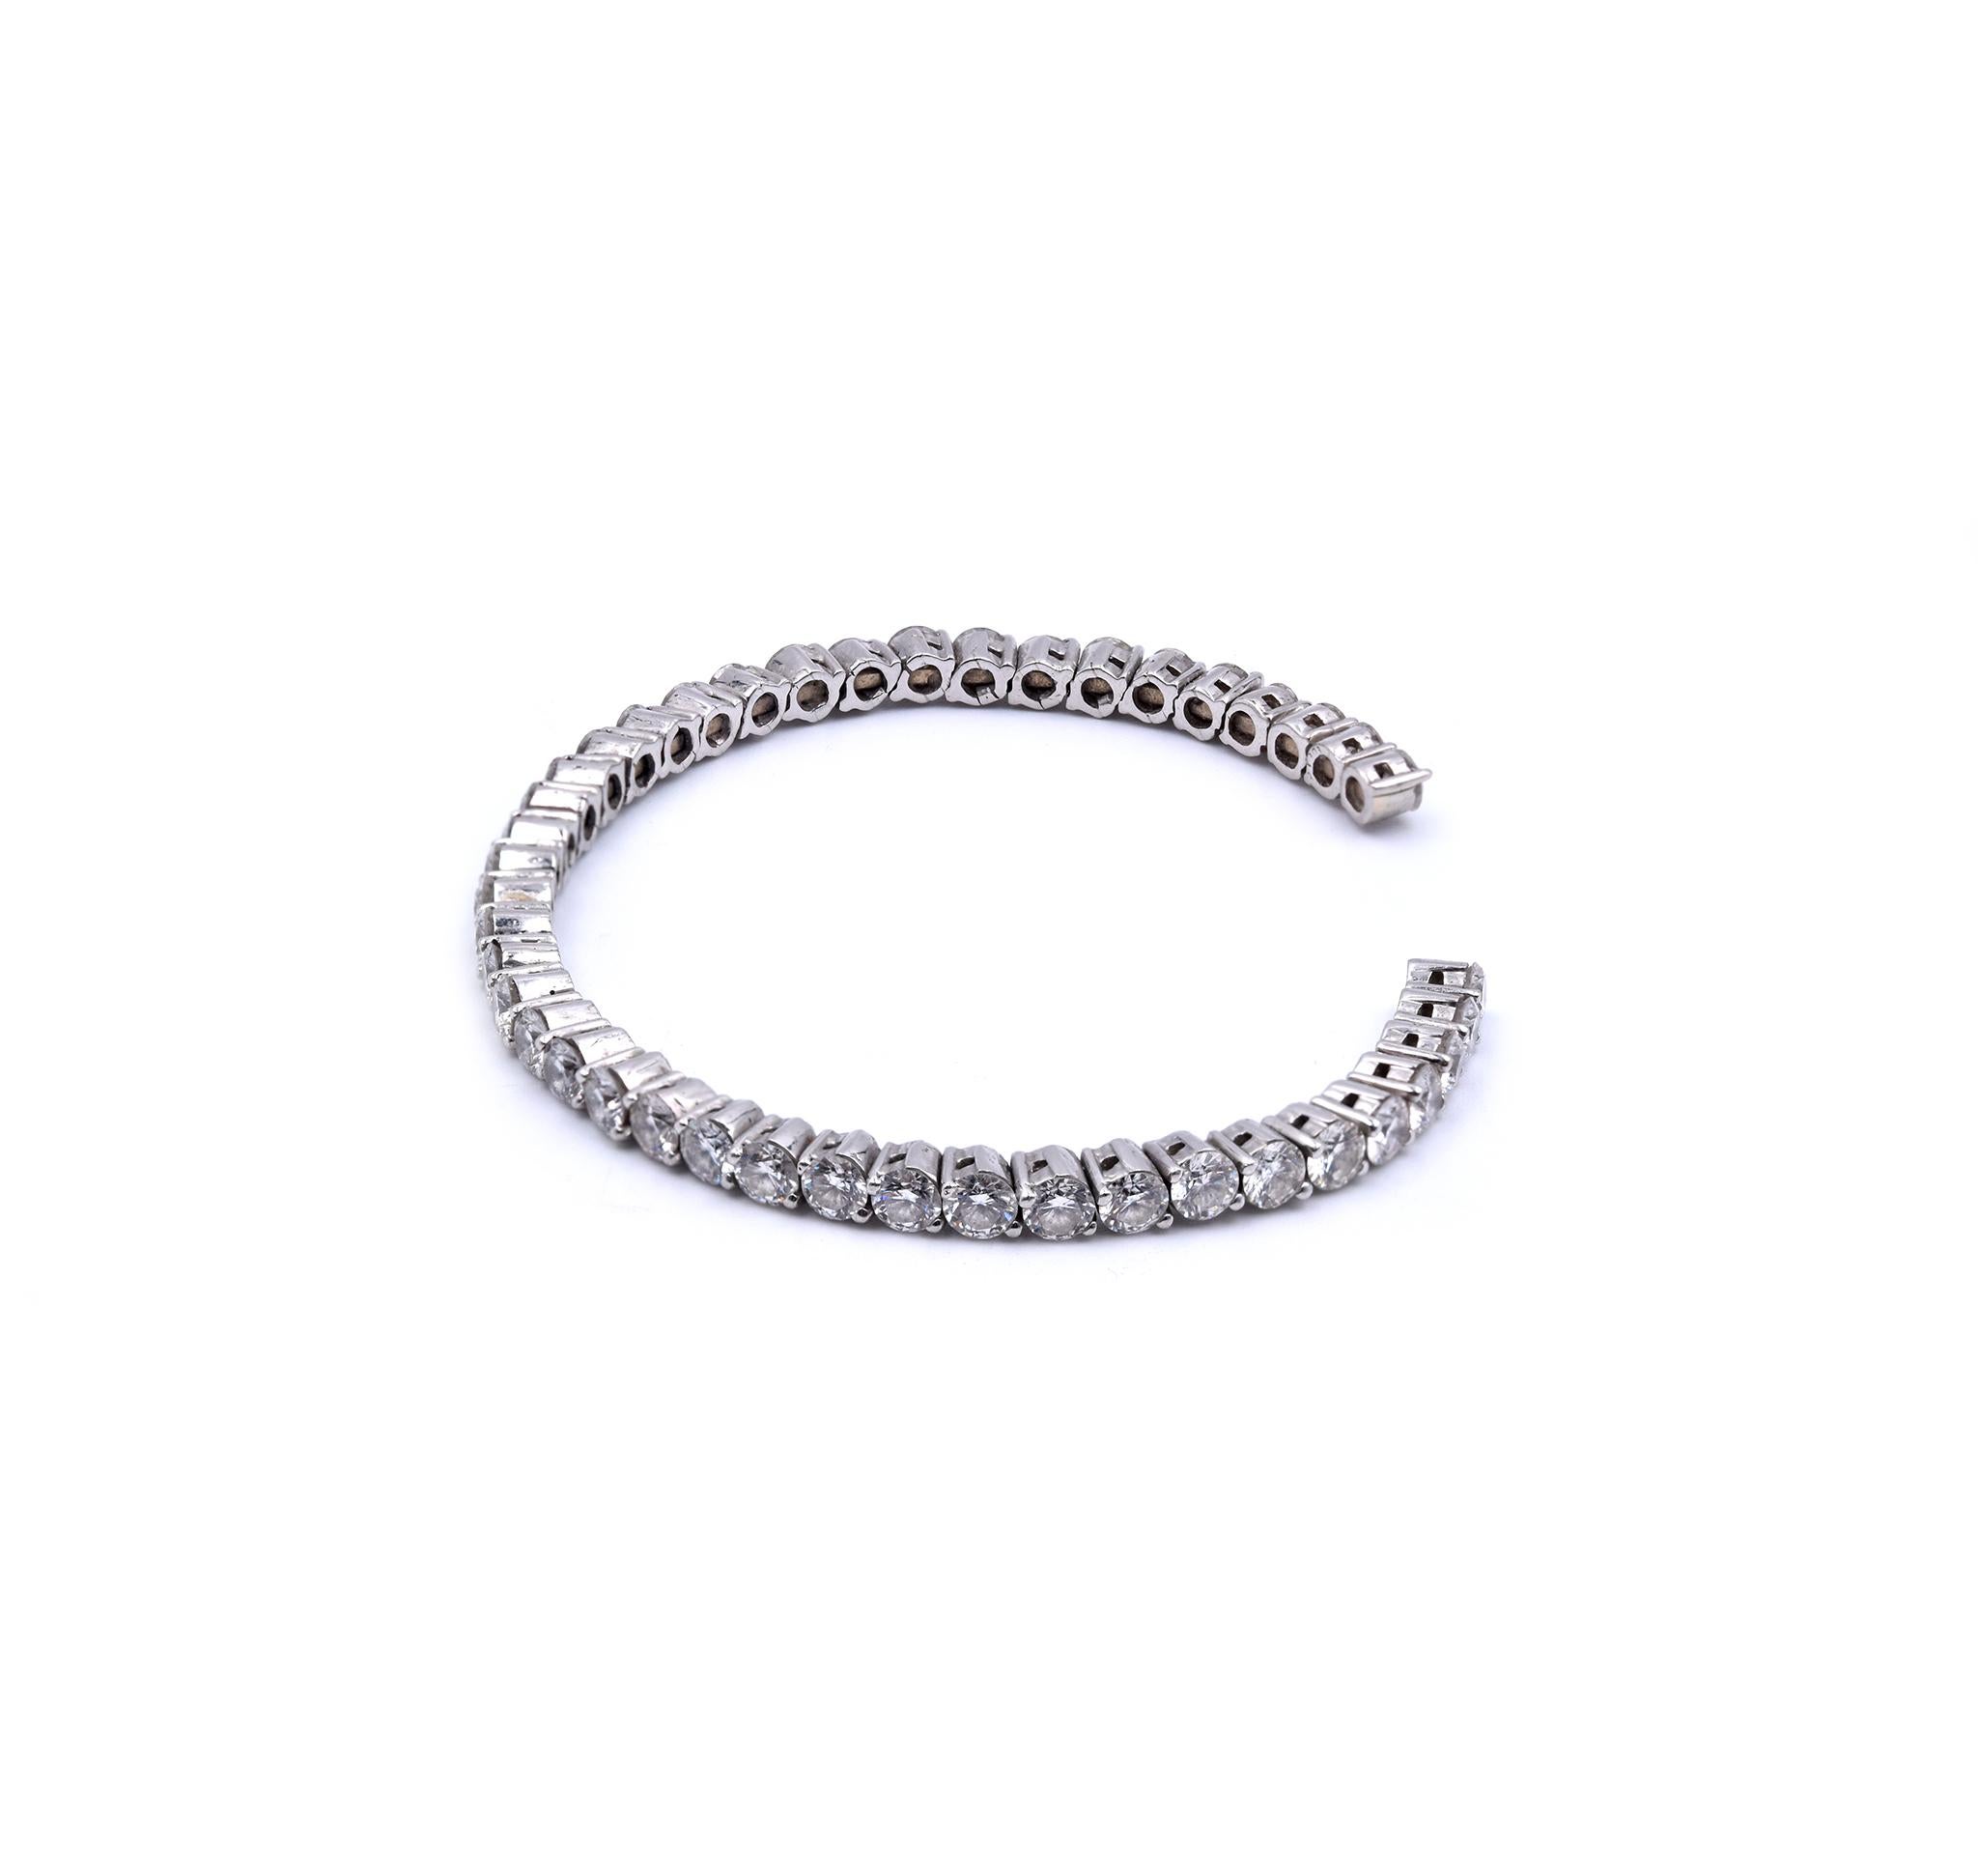 Material: 18K white gold
Diamonds: 42 round brilliant cut = 9.24cttw
Color: G/H
Clarity: VS2-SI1
Dimensions: bracelet will fit up to a 7-7.5-inch wrist
Weight: 26.32 grams
